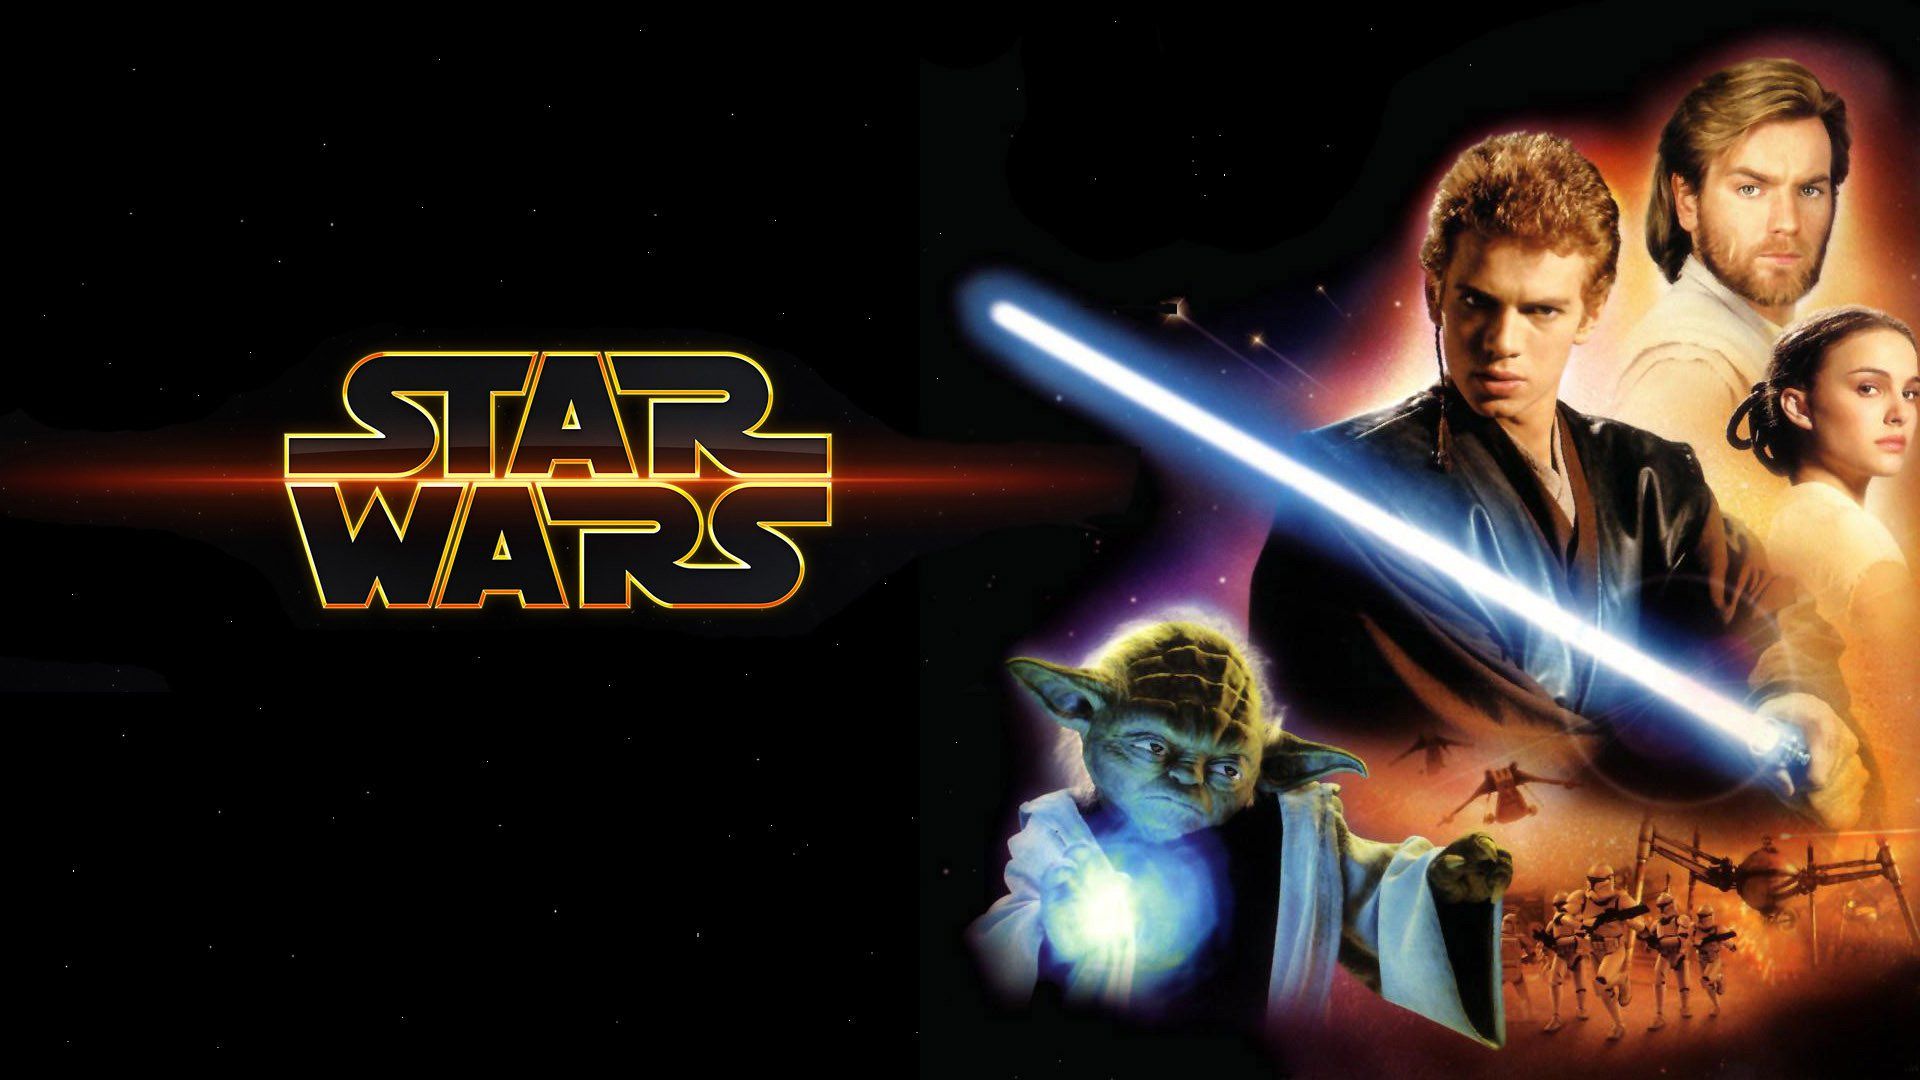 Star Wars Episode II: Attack Of The Clones Wallpaper, Picture, Image